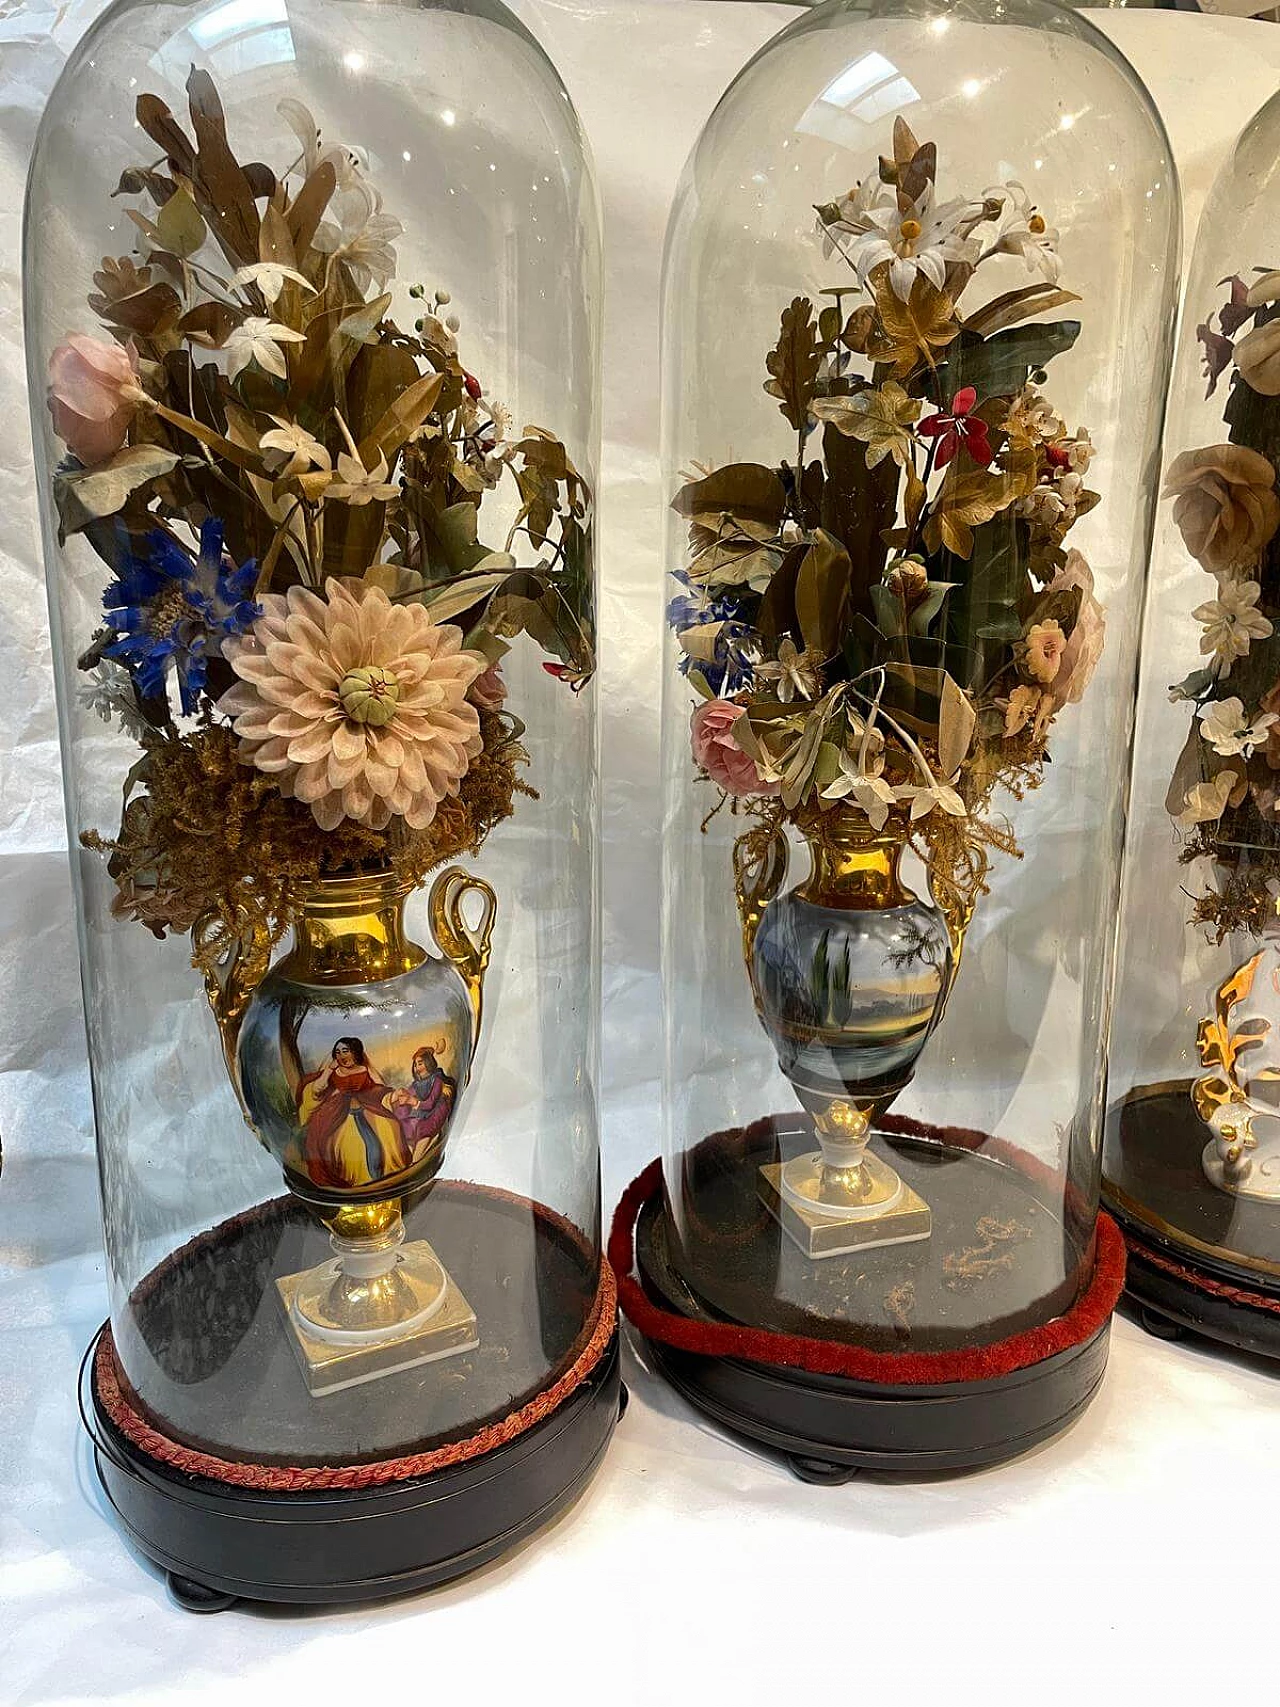 Floral composition in glass display with ceramic vase or cornucopia, 19th century 4